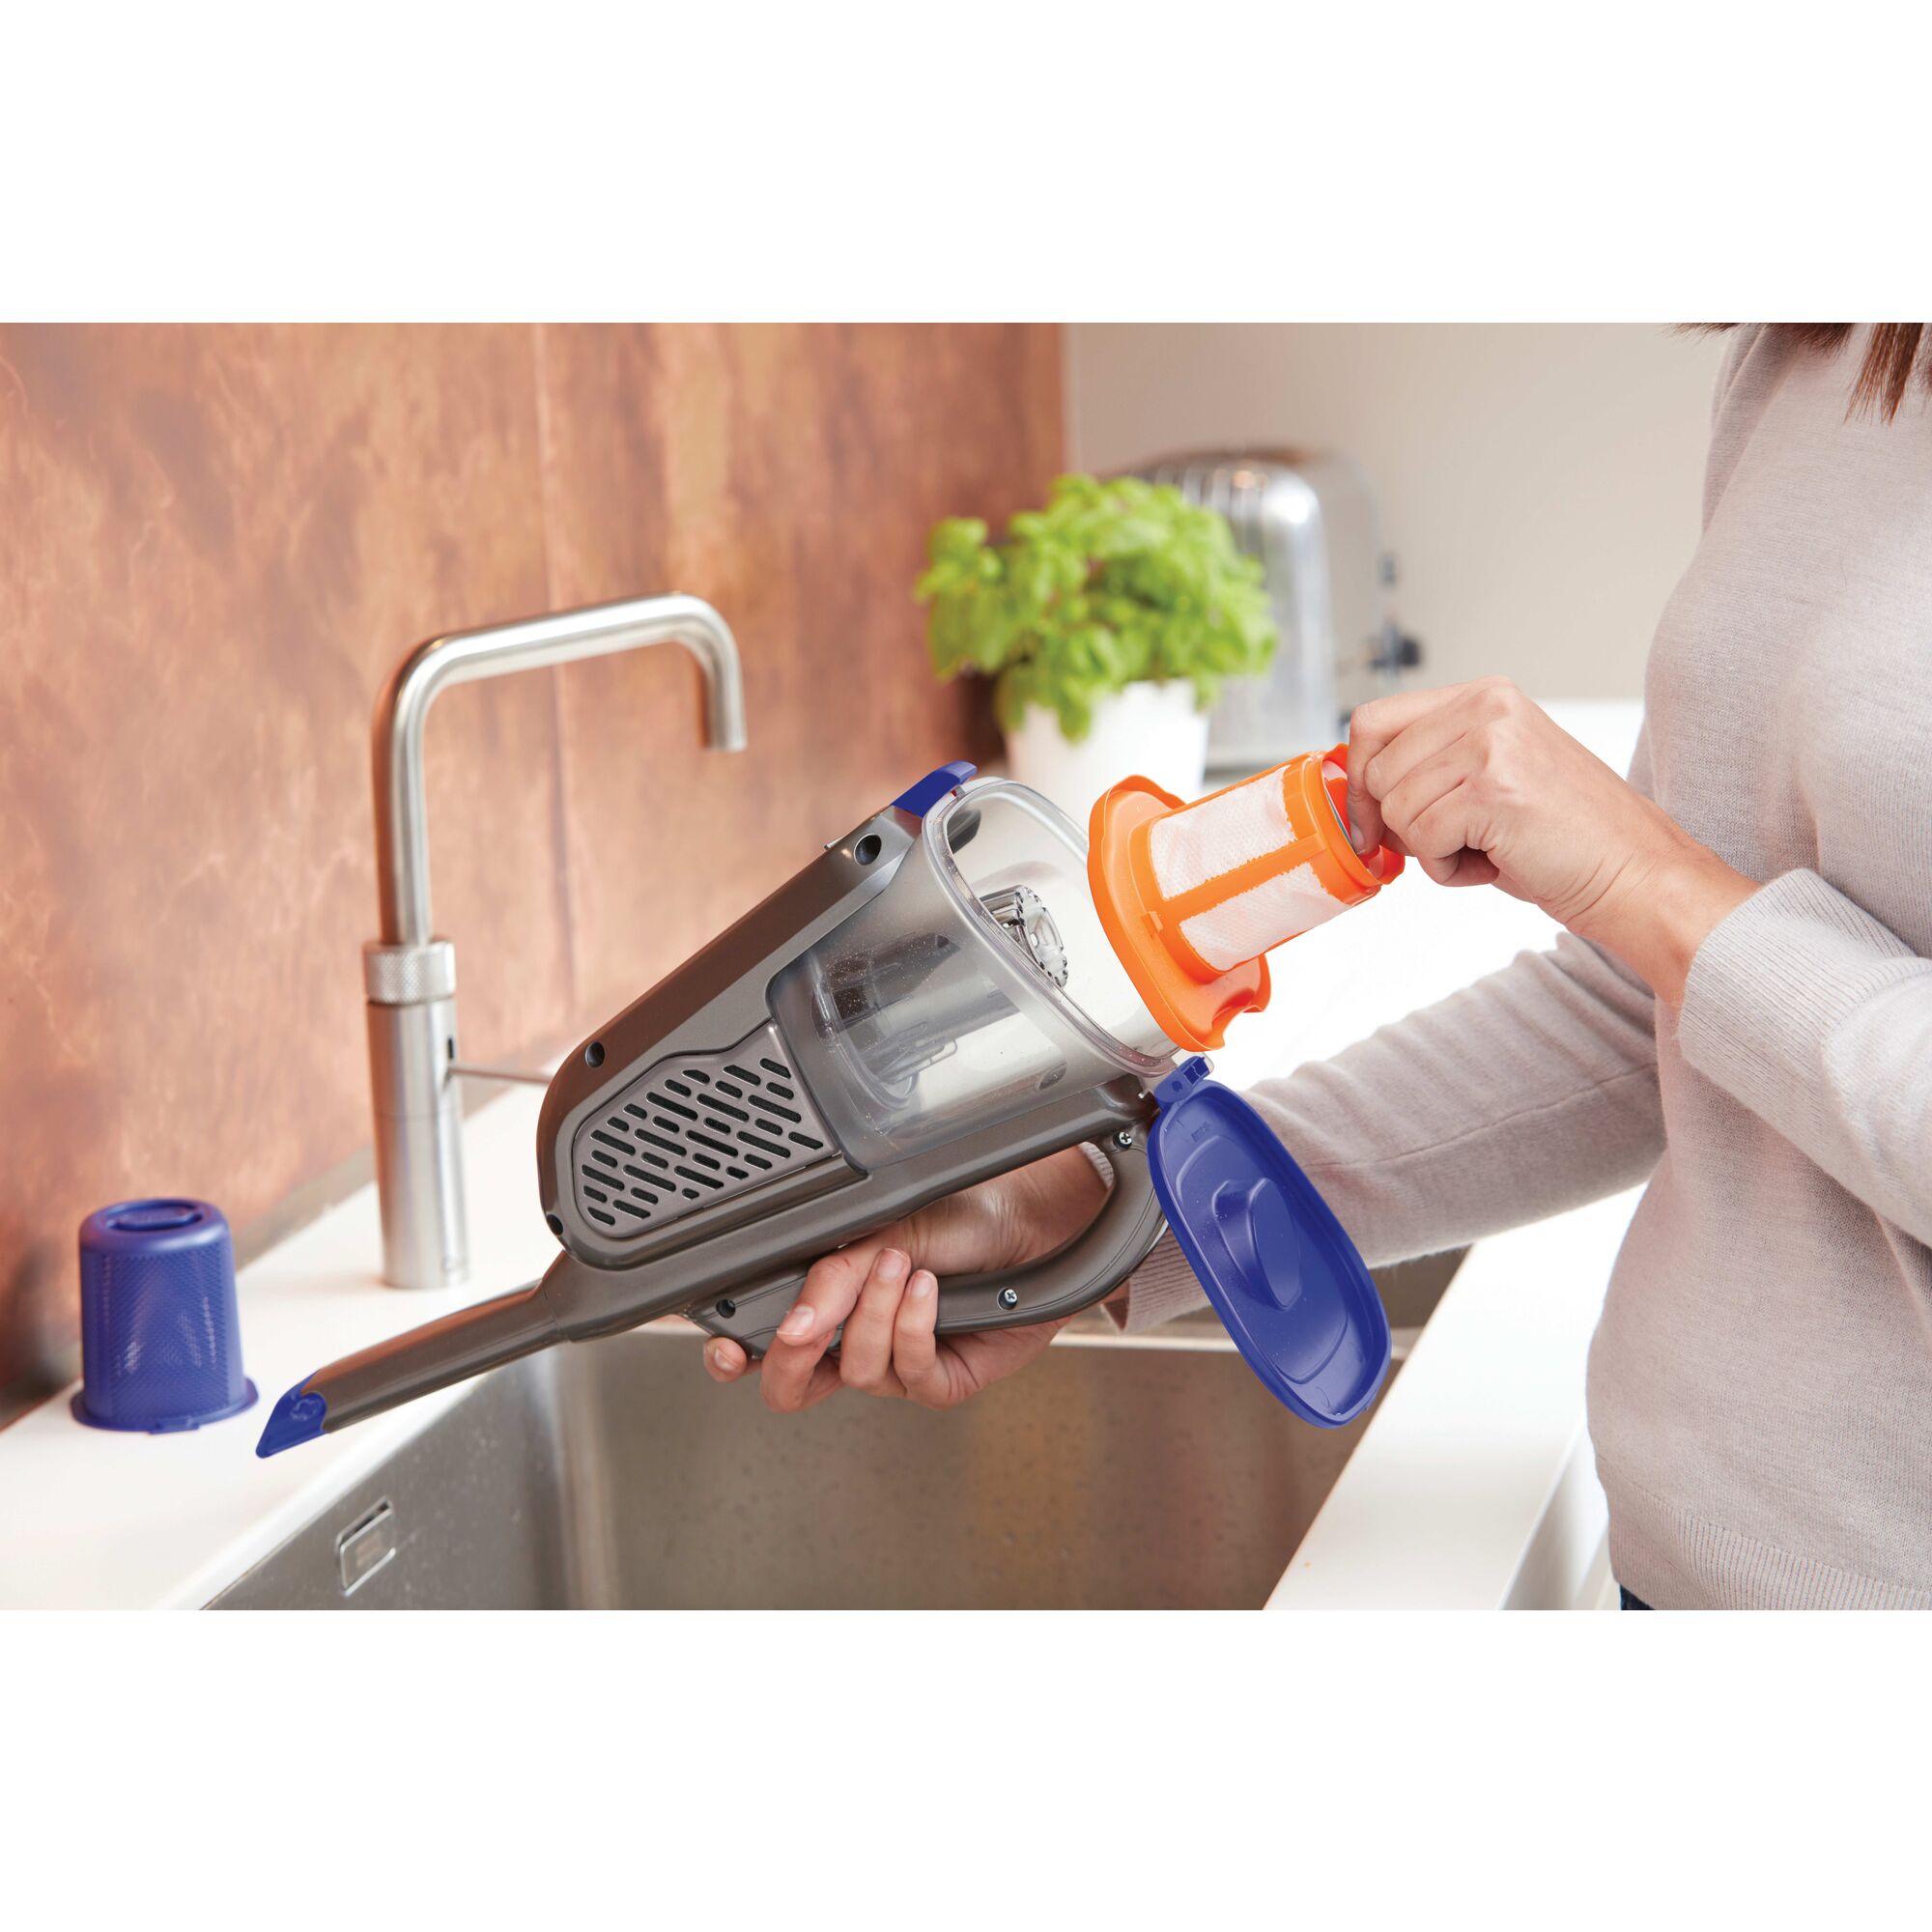 Washable filter feature of 20 volt MAX dustbuster Advanced Clean pet hand vacuum with base charger and extra filter.